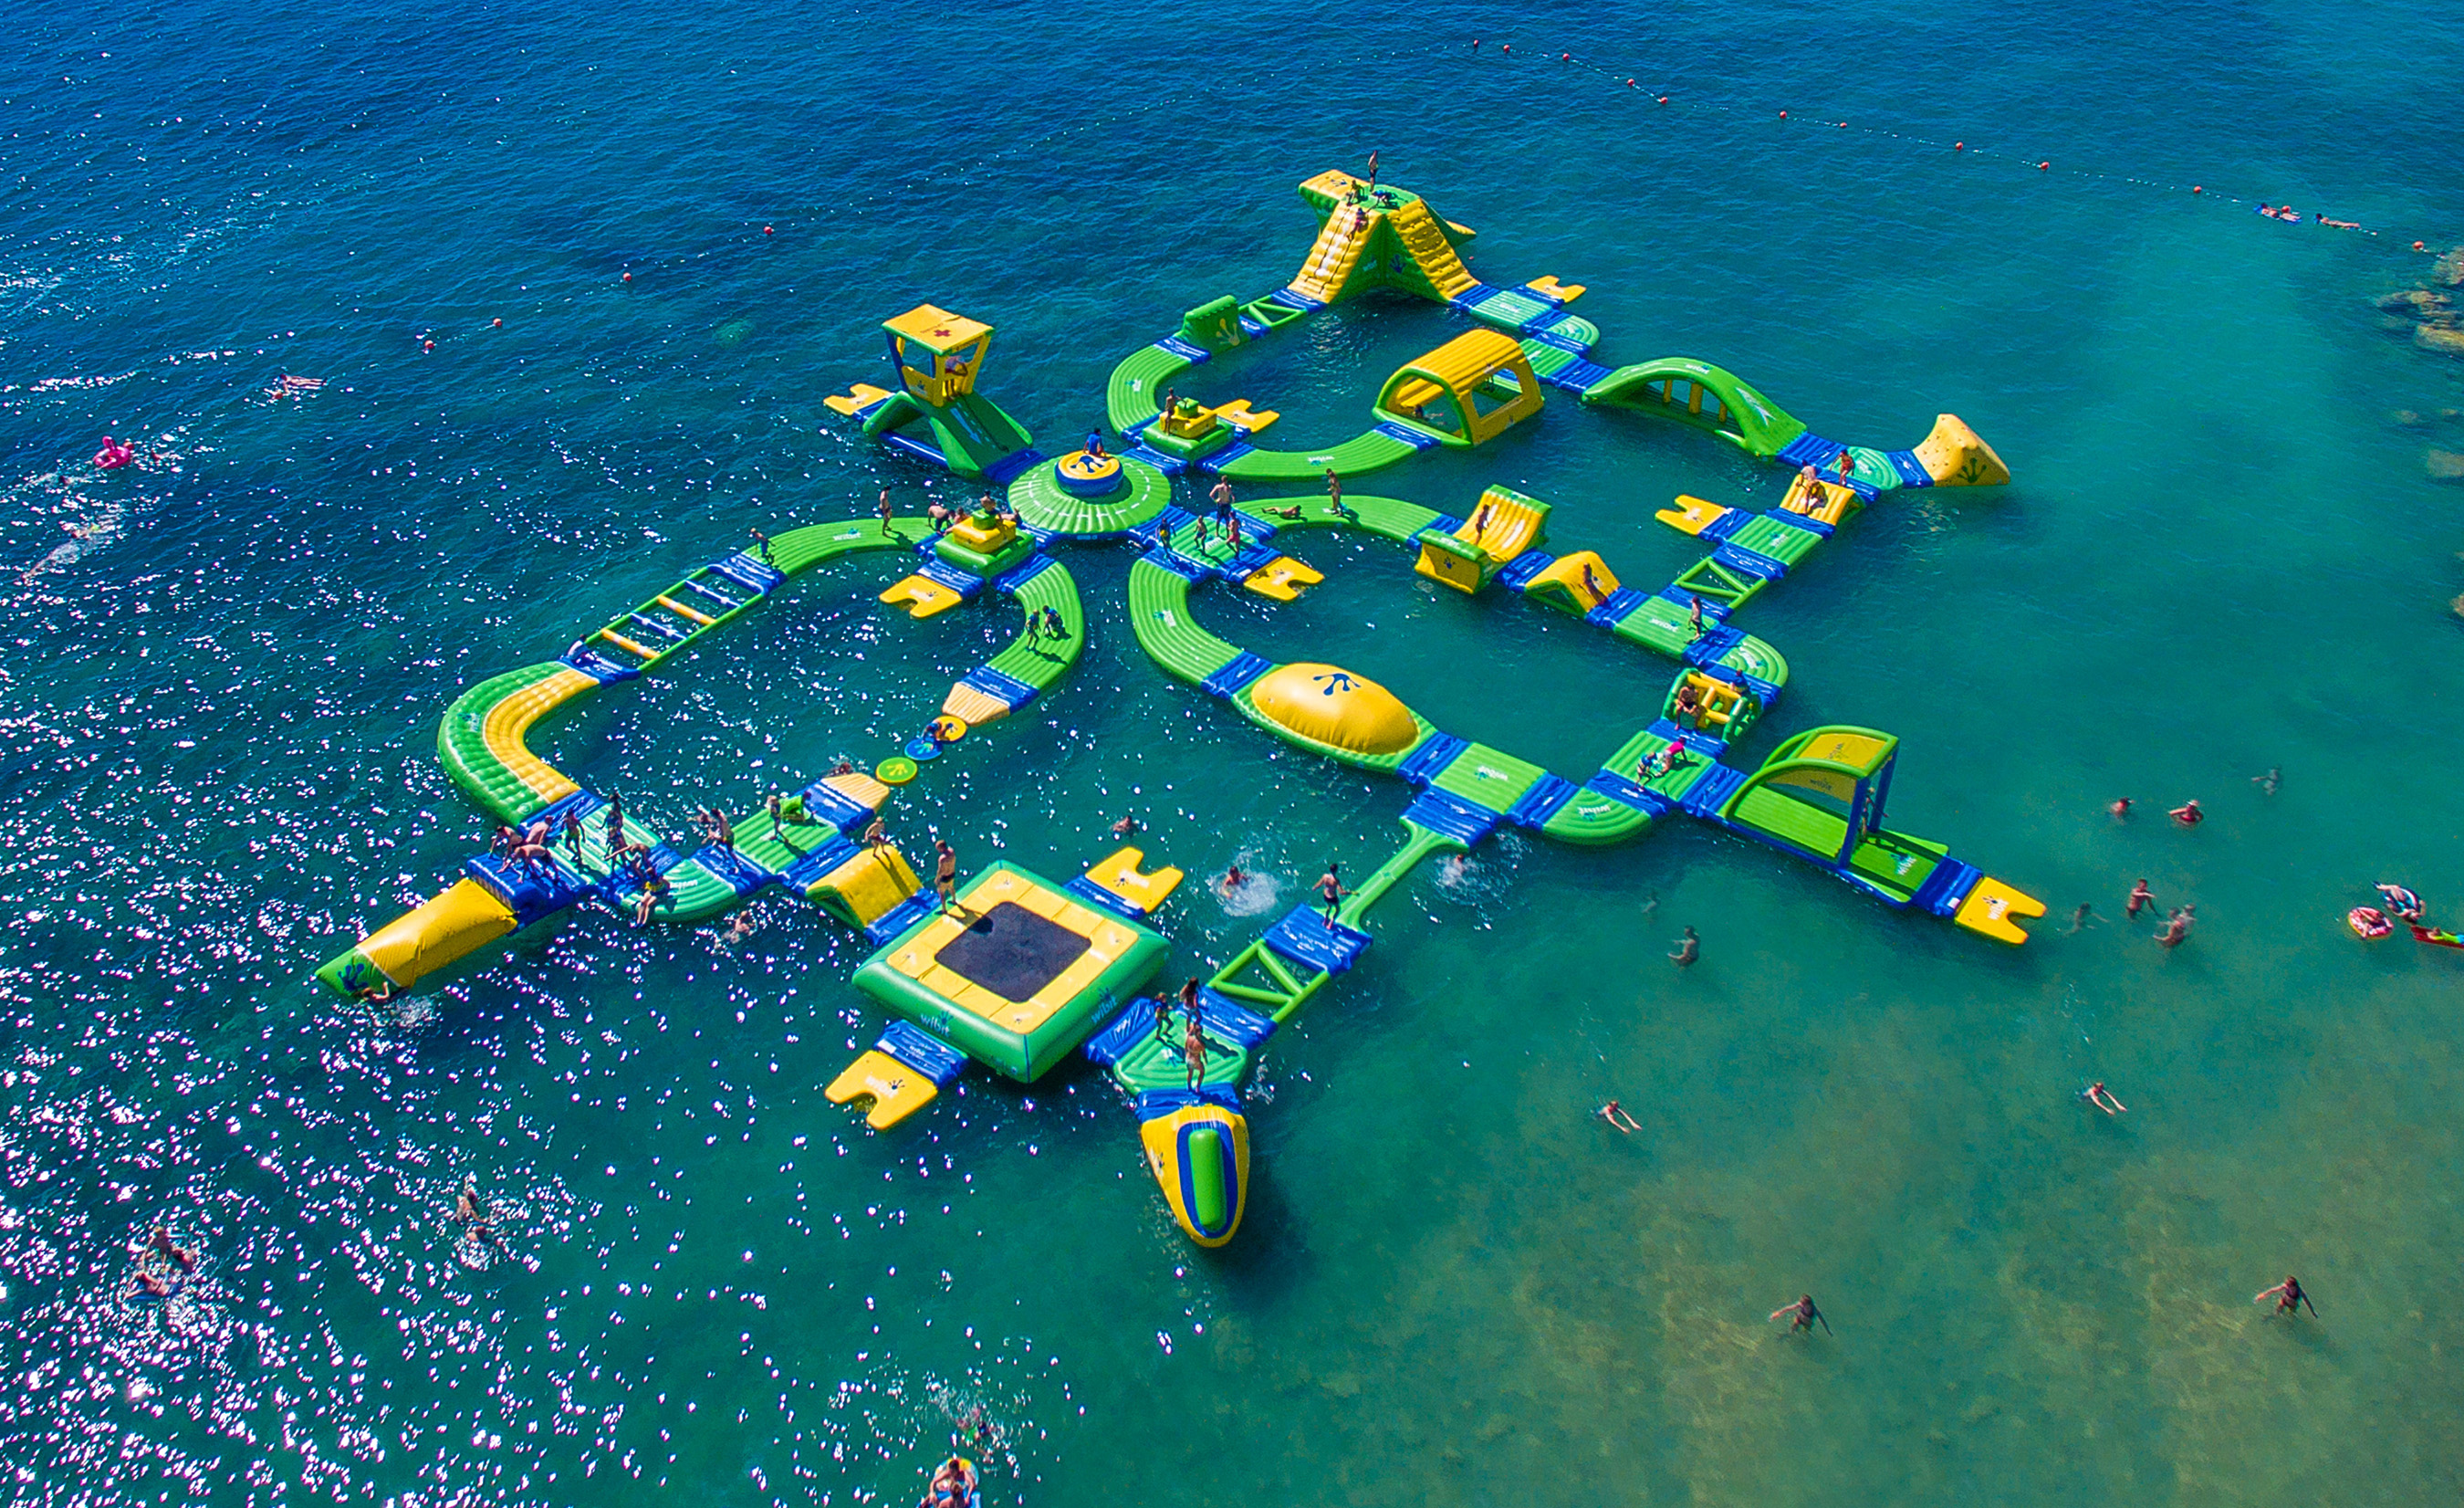 Nona Adventure Park will feature an inflatable, floating obstacle course, a 60-foot climbing tower and other thrills.